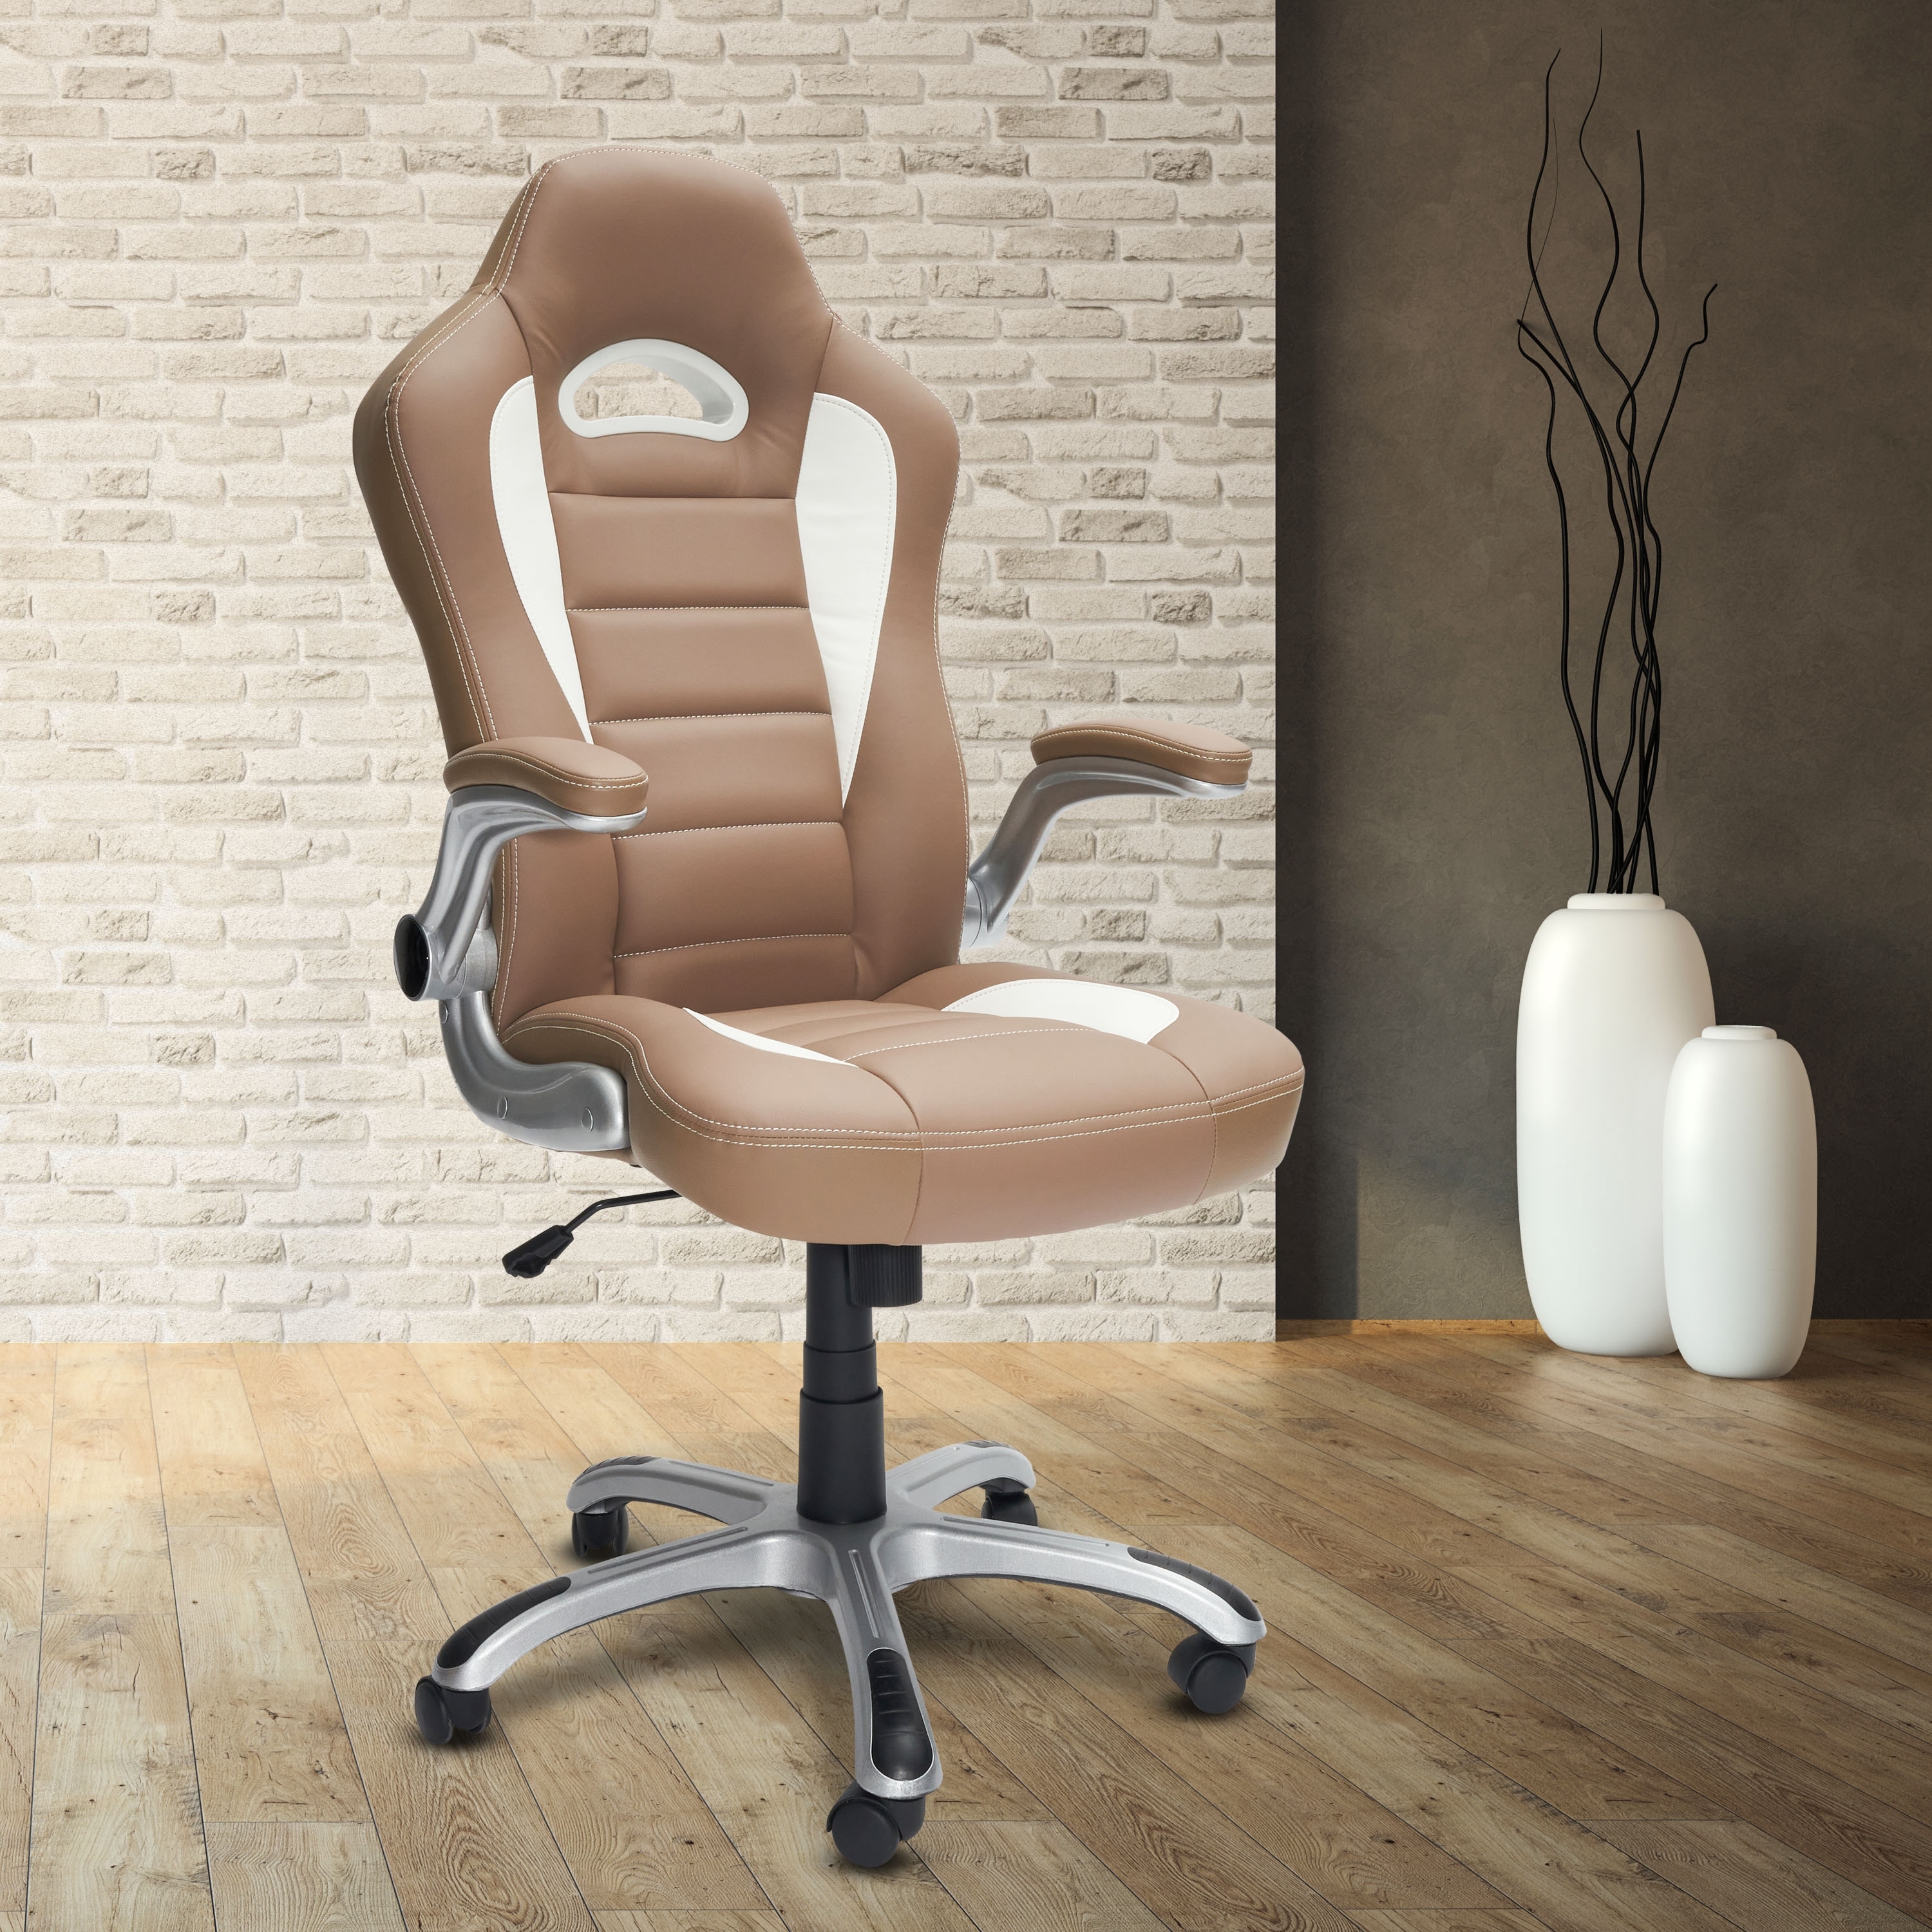 https://ak1.ostkcdn.com/images/products/is/images/direct/2f167097892d1413219f8c6d7d3dcb07b41f4602/Ergonomicn-Computer-Office-Chair%2C-Executive-Gaming-Chair-with-Flip-up-Armrests-and-Lumbar-Support%2C-Height-Adjustable%2C-Brown.jpg